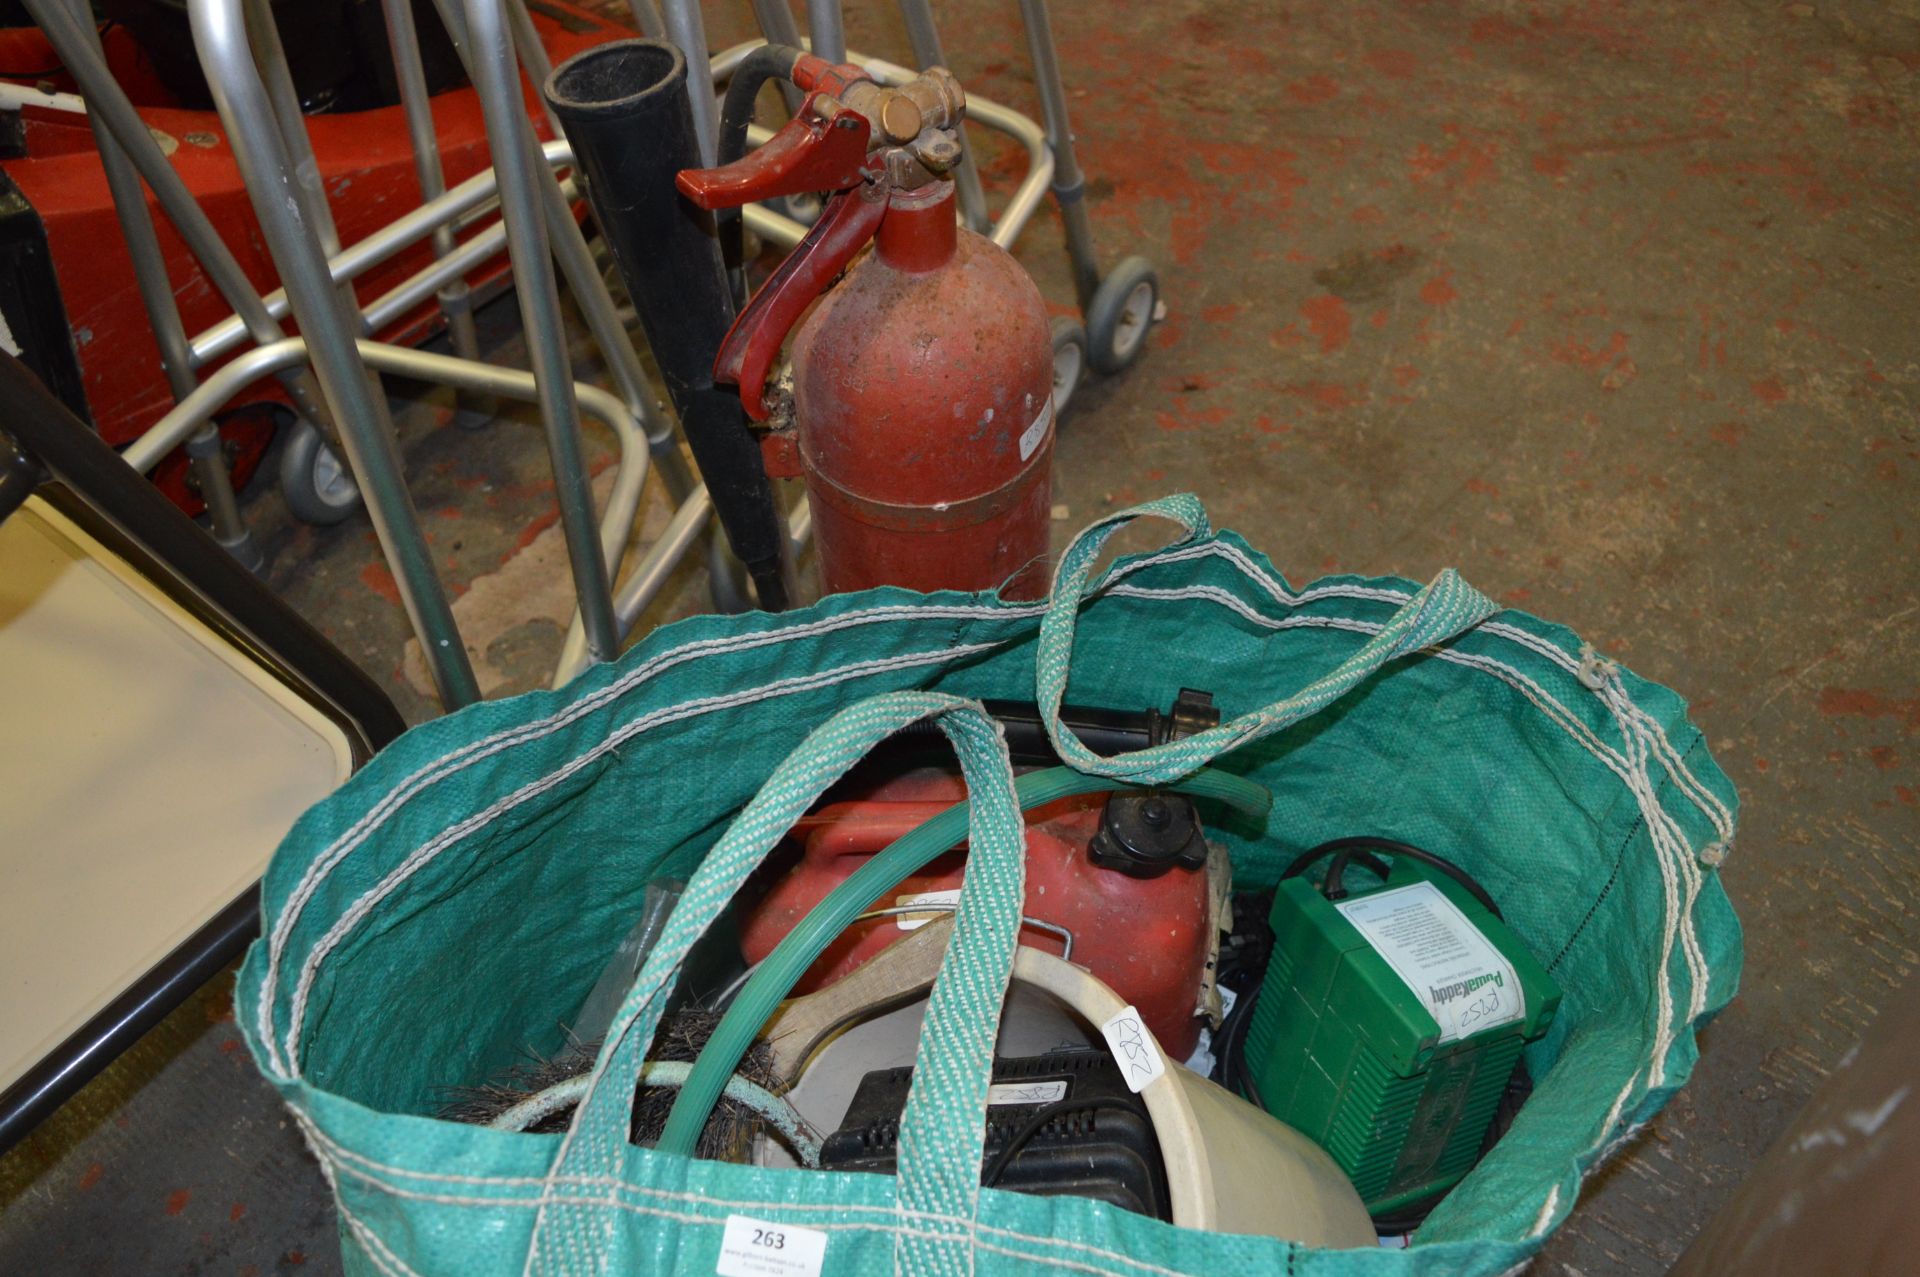 Greenbag and Contents Including Fire Extinguisher, Battery Chargers, Sprinkler, Petrol Can, etc.